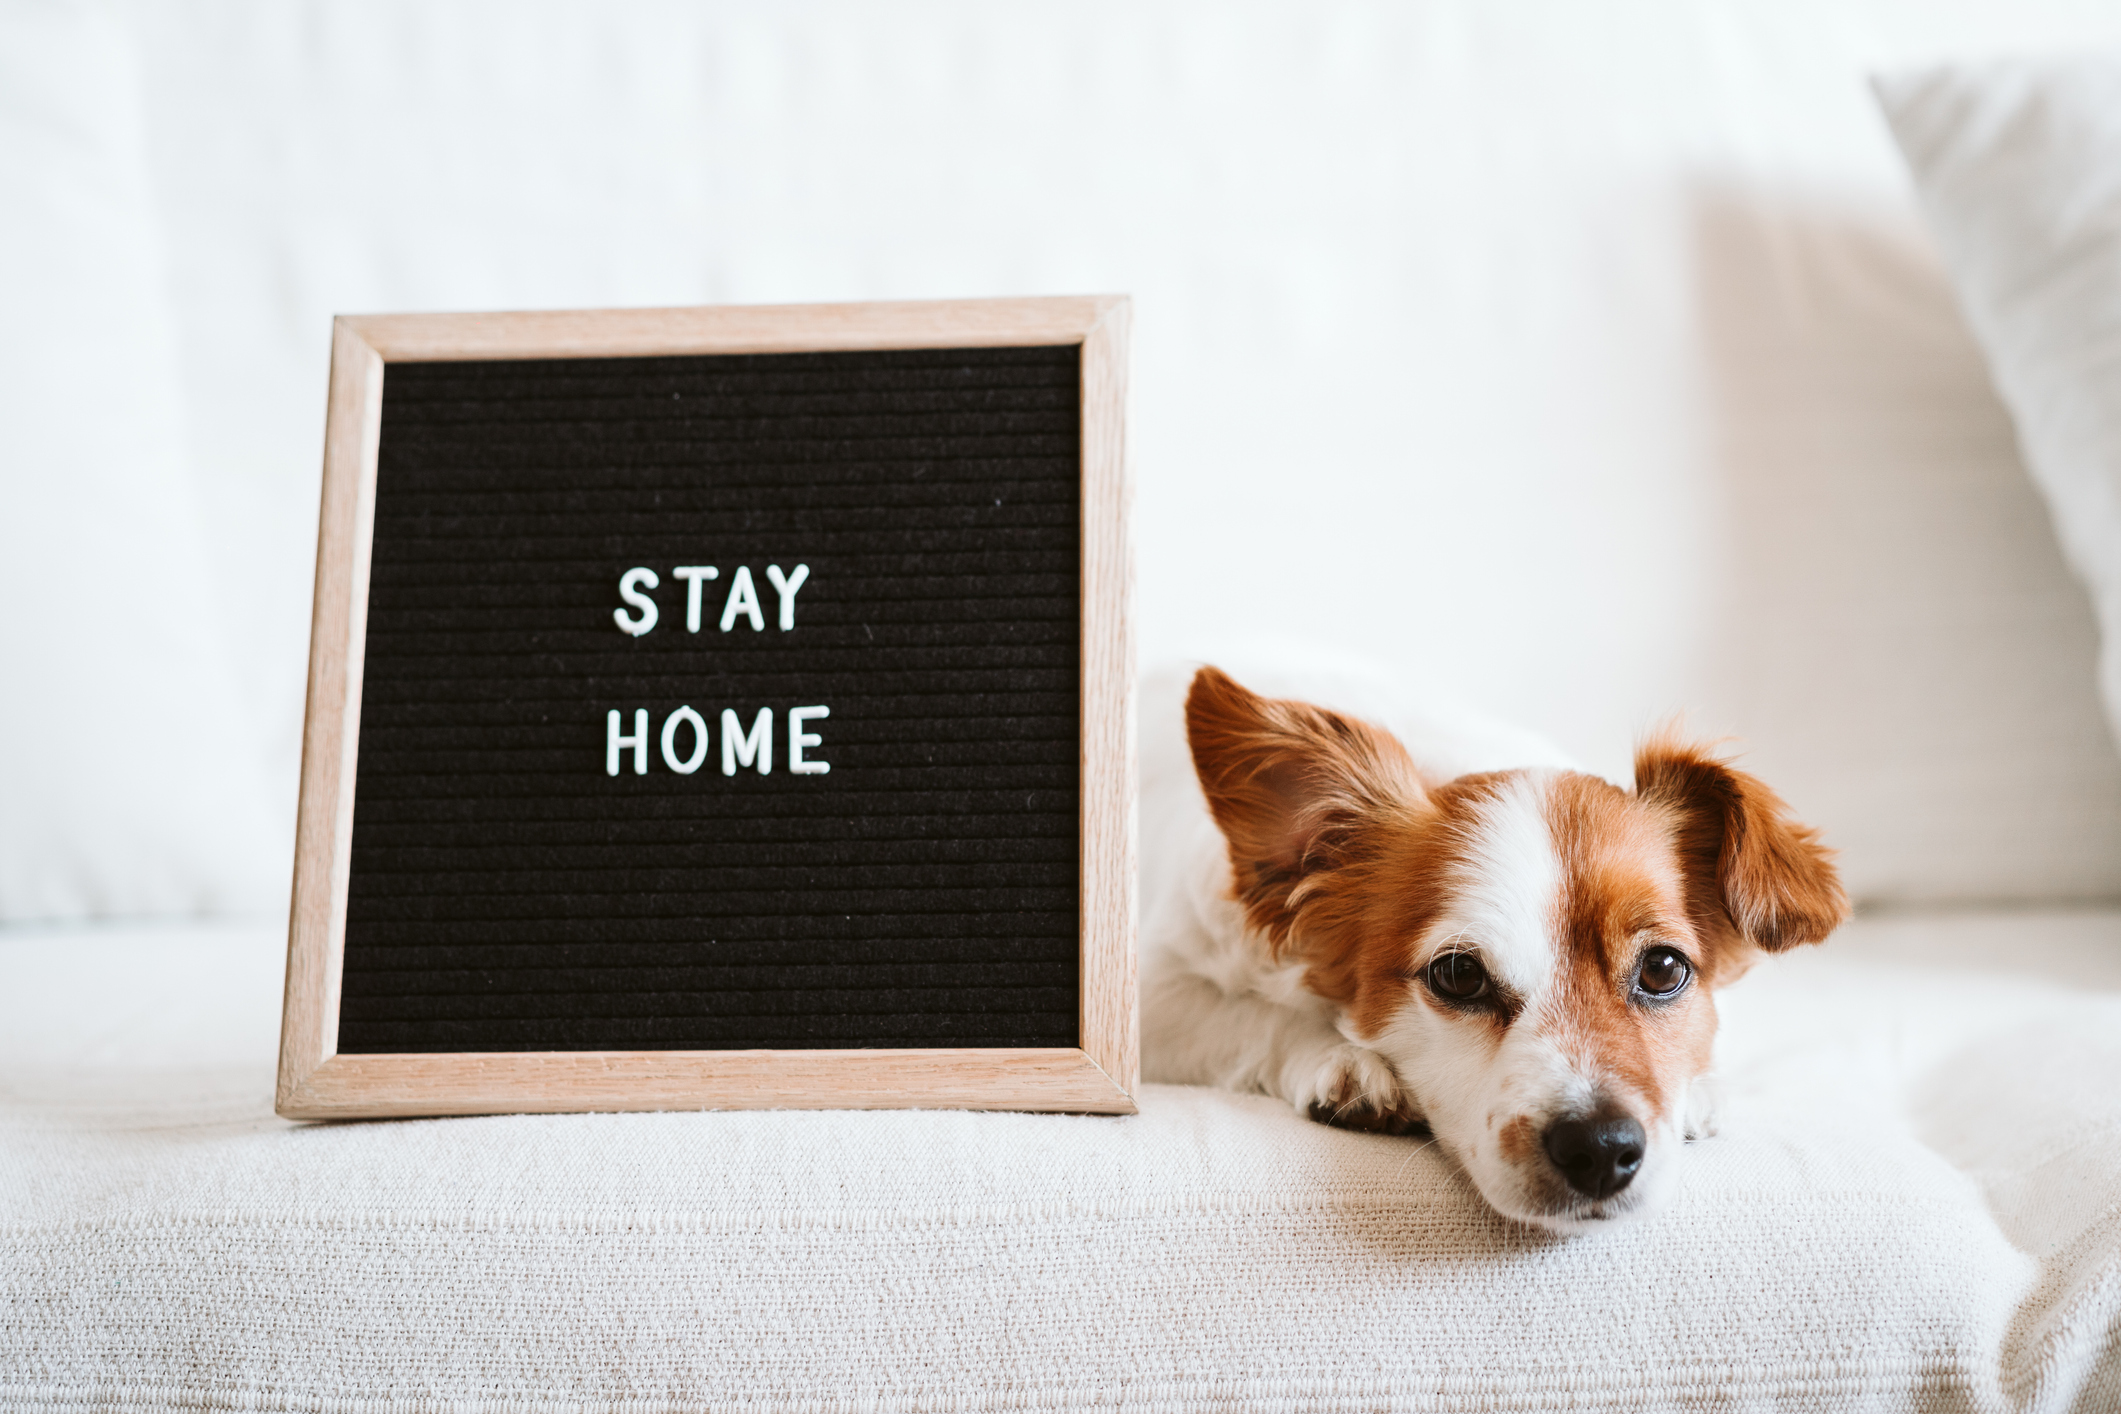 Small dog with long hair on ears on a couch next to a Stay Home sign